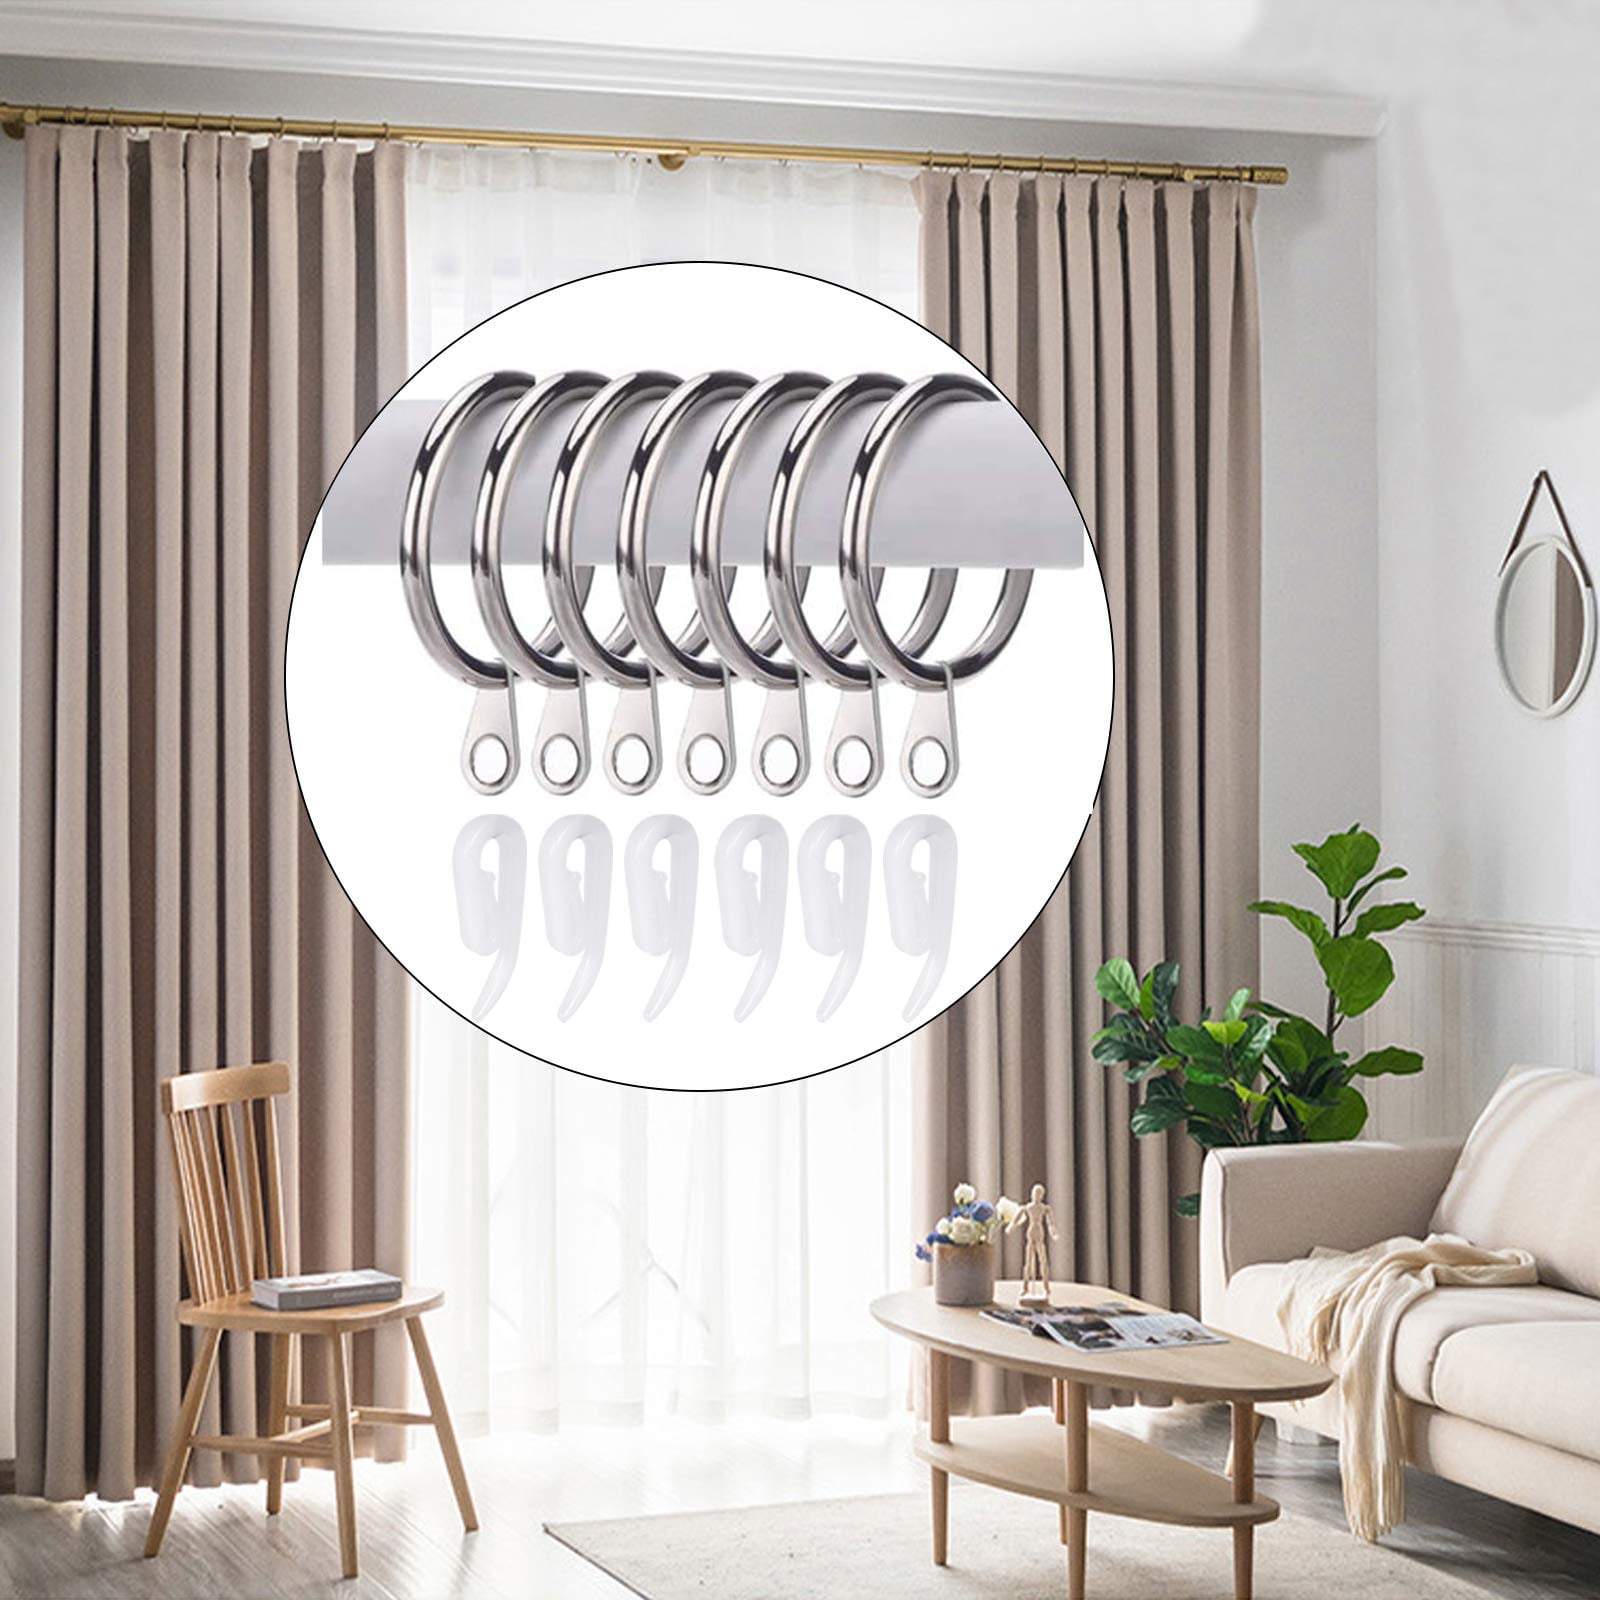 KissDate 30mm Metal Drapery Curtain Rings Hanging Rings & Curtain Hooks Plastic White for Curtains and Rods Drape Sliding Eyelet Rings 50 Pack Curtain Rings and Hooks Silver 